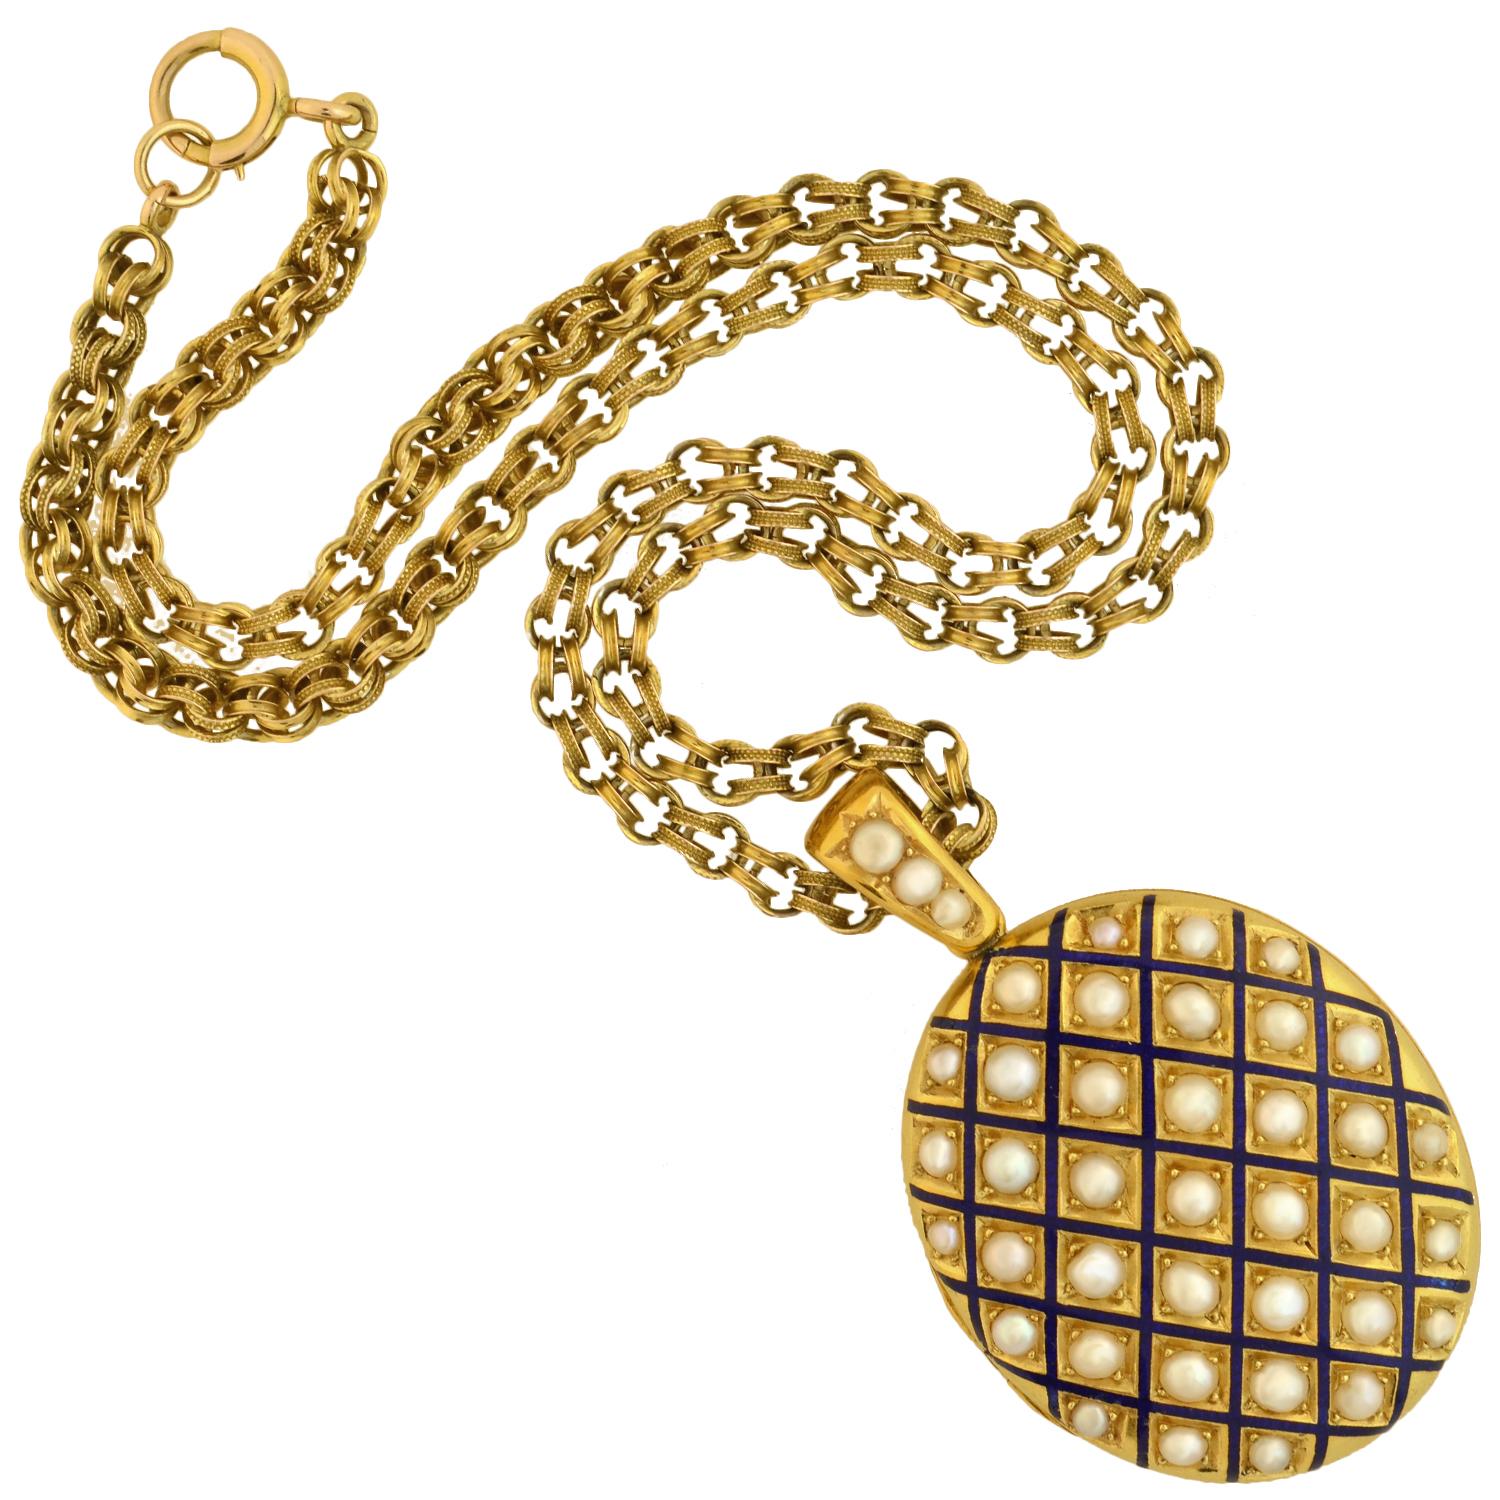 A magnificent 3-piece set from the Victorian (ca1871) era! Crafted in 18kt yellow gold, this impressive ensemble includes a pair of earrings, a locket necklace, and a bangle bracelet. Each piece is decorated with a matching grid-like pattern of